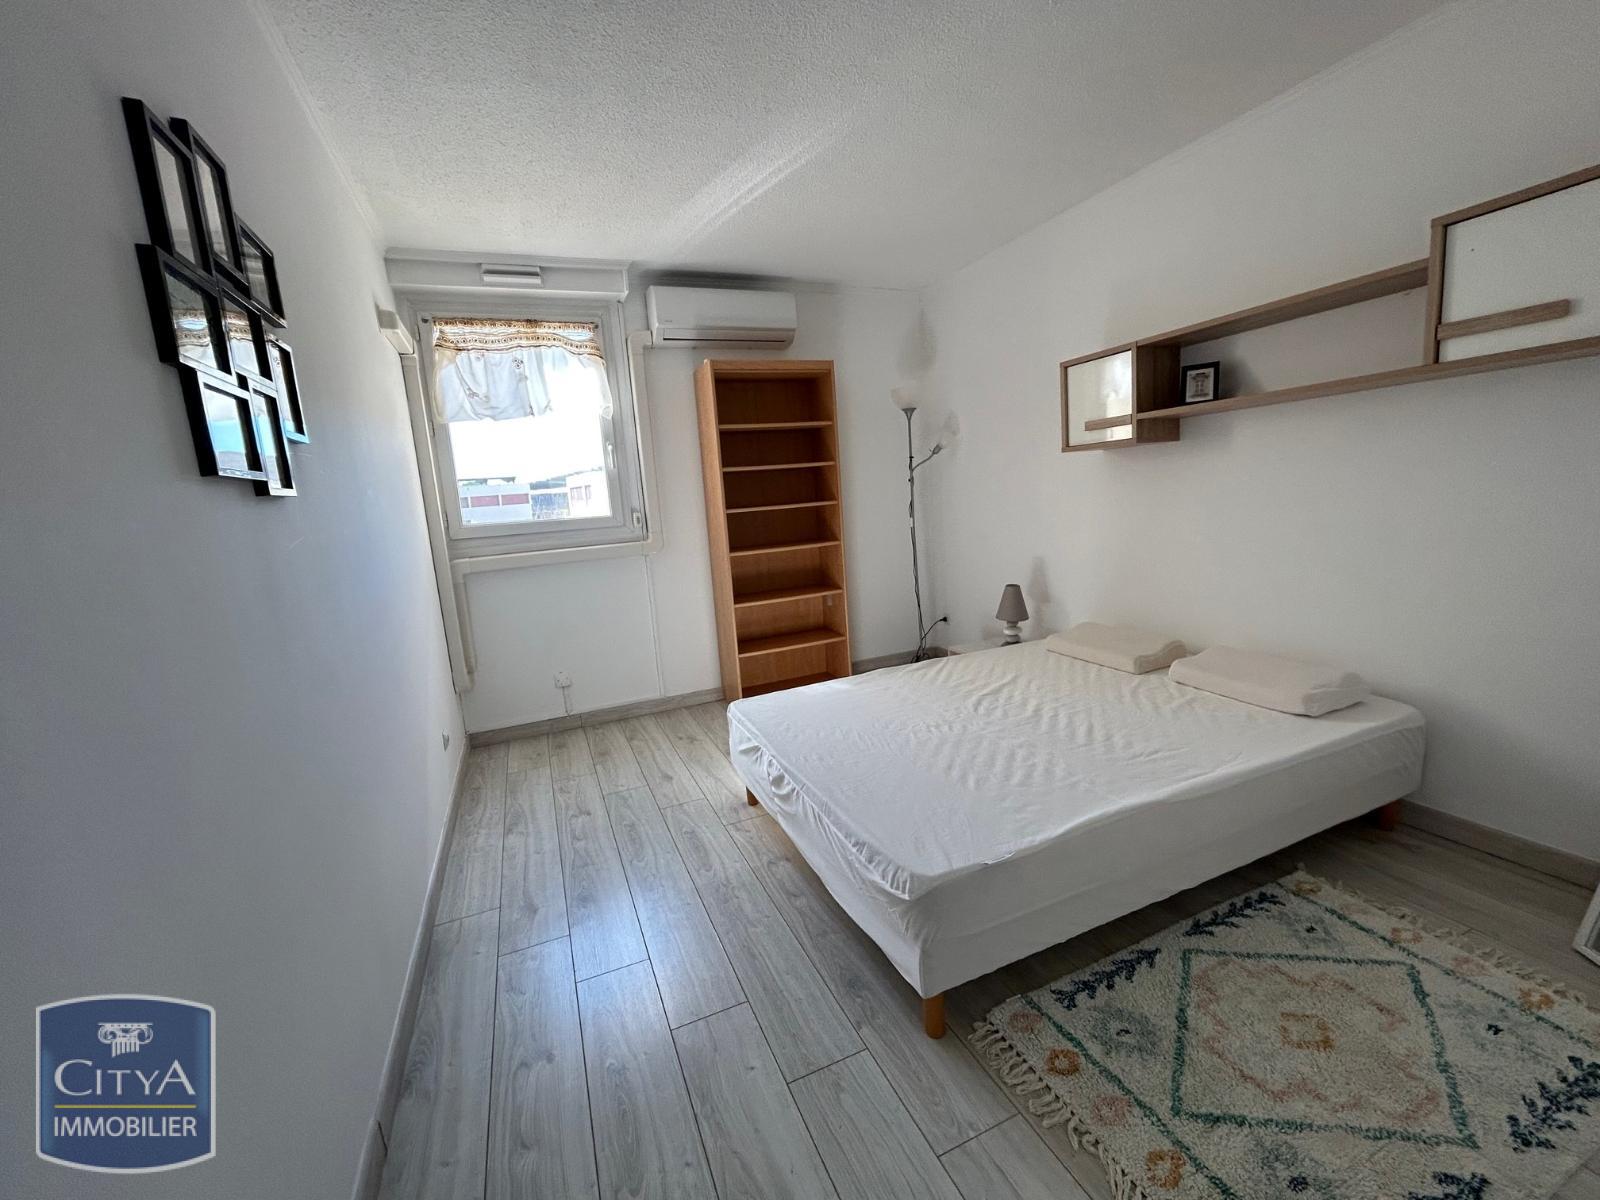 LOCATION T4 CHAMBRE CLIMATISEE